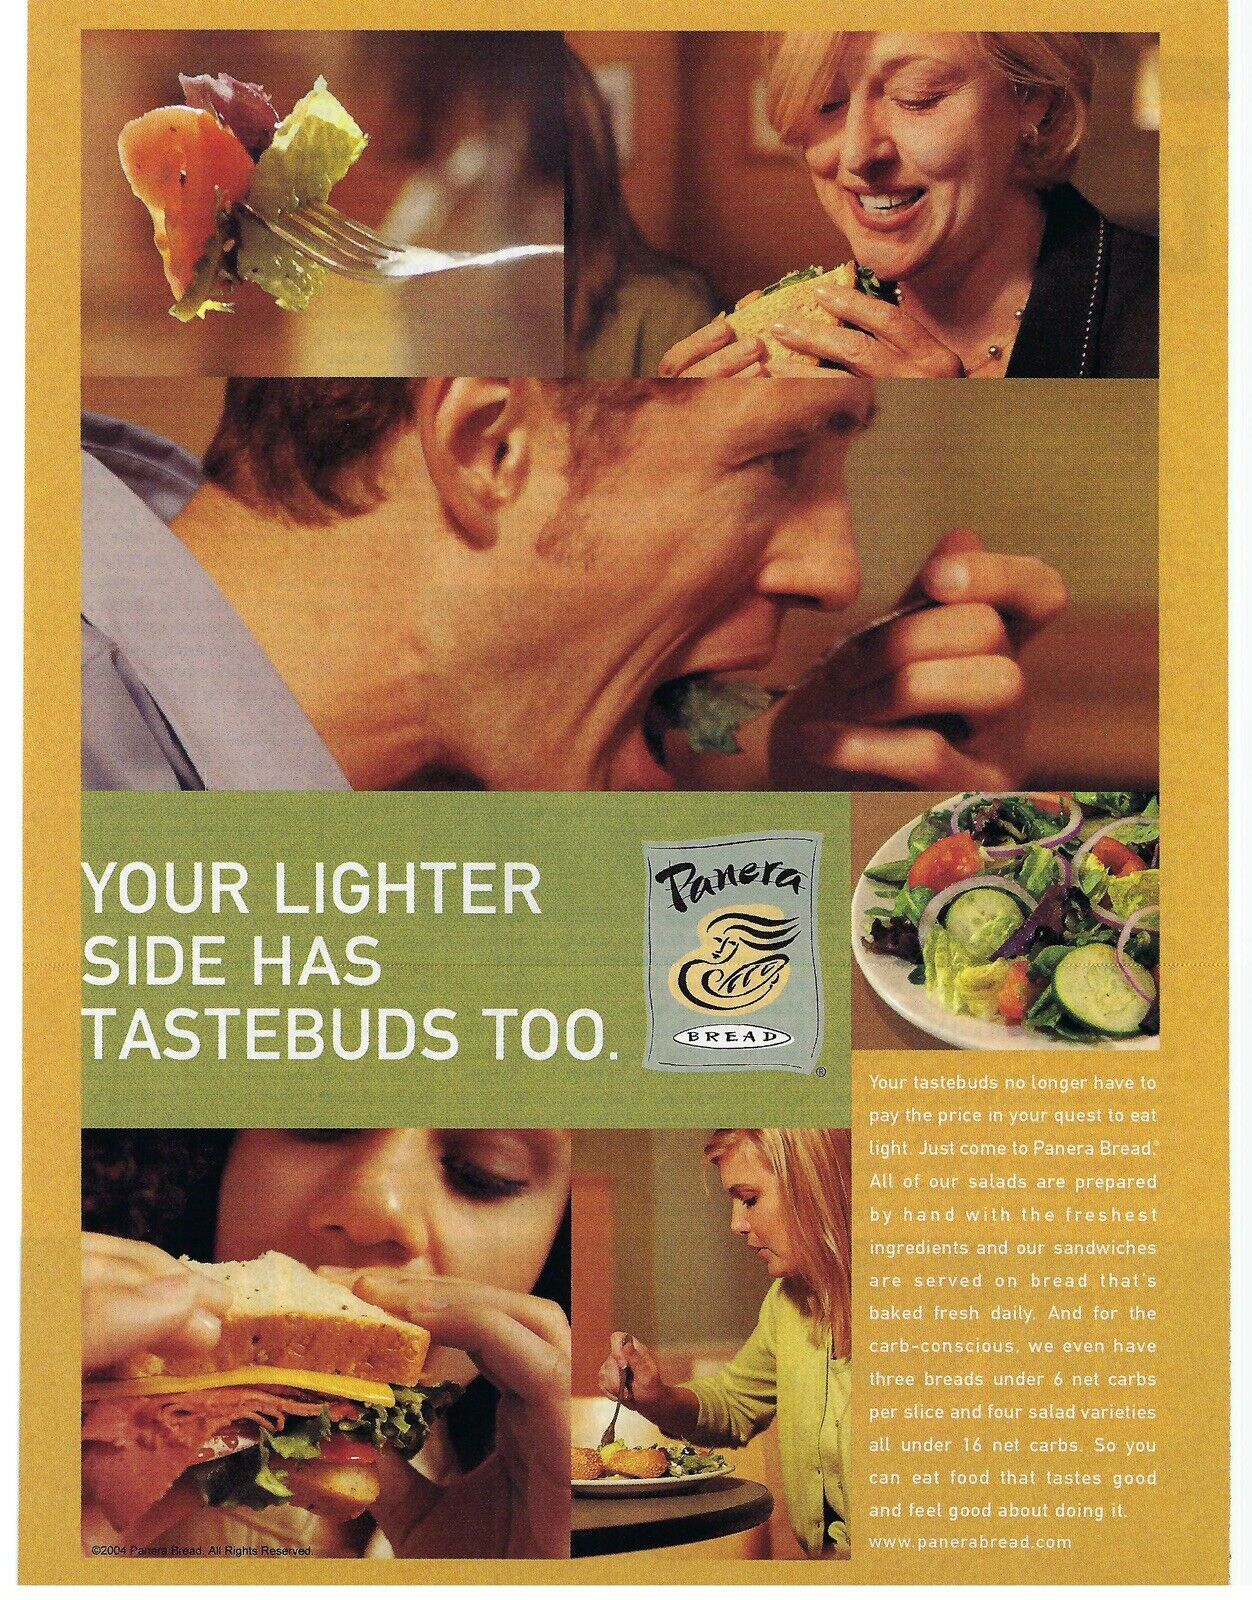 2004 Panera Bread Your Lighter Side Has Tastebuds Too Retro Print Ad/Poster